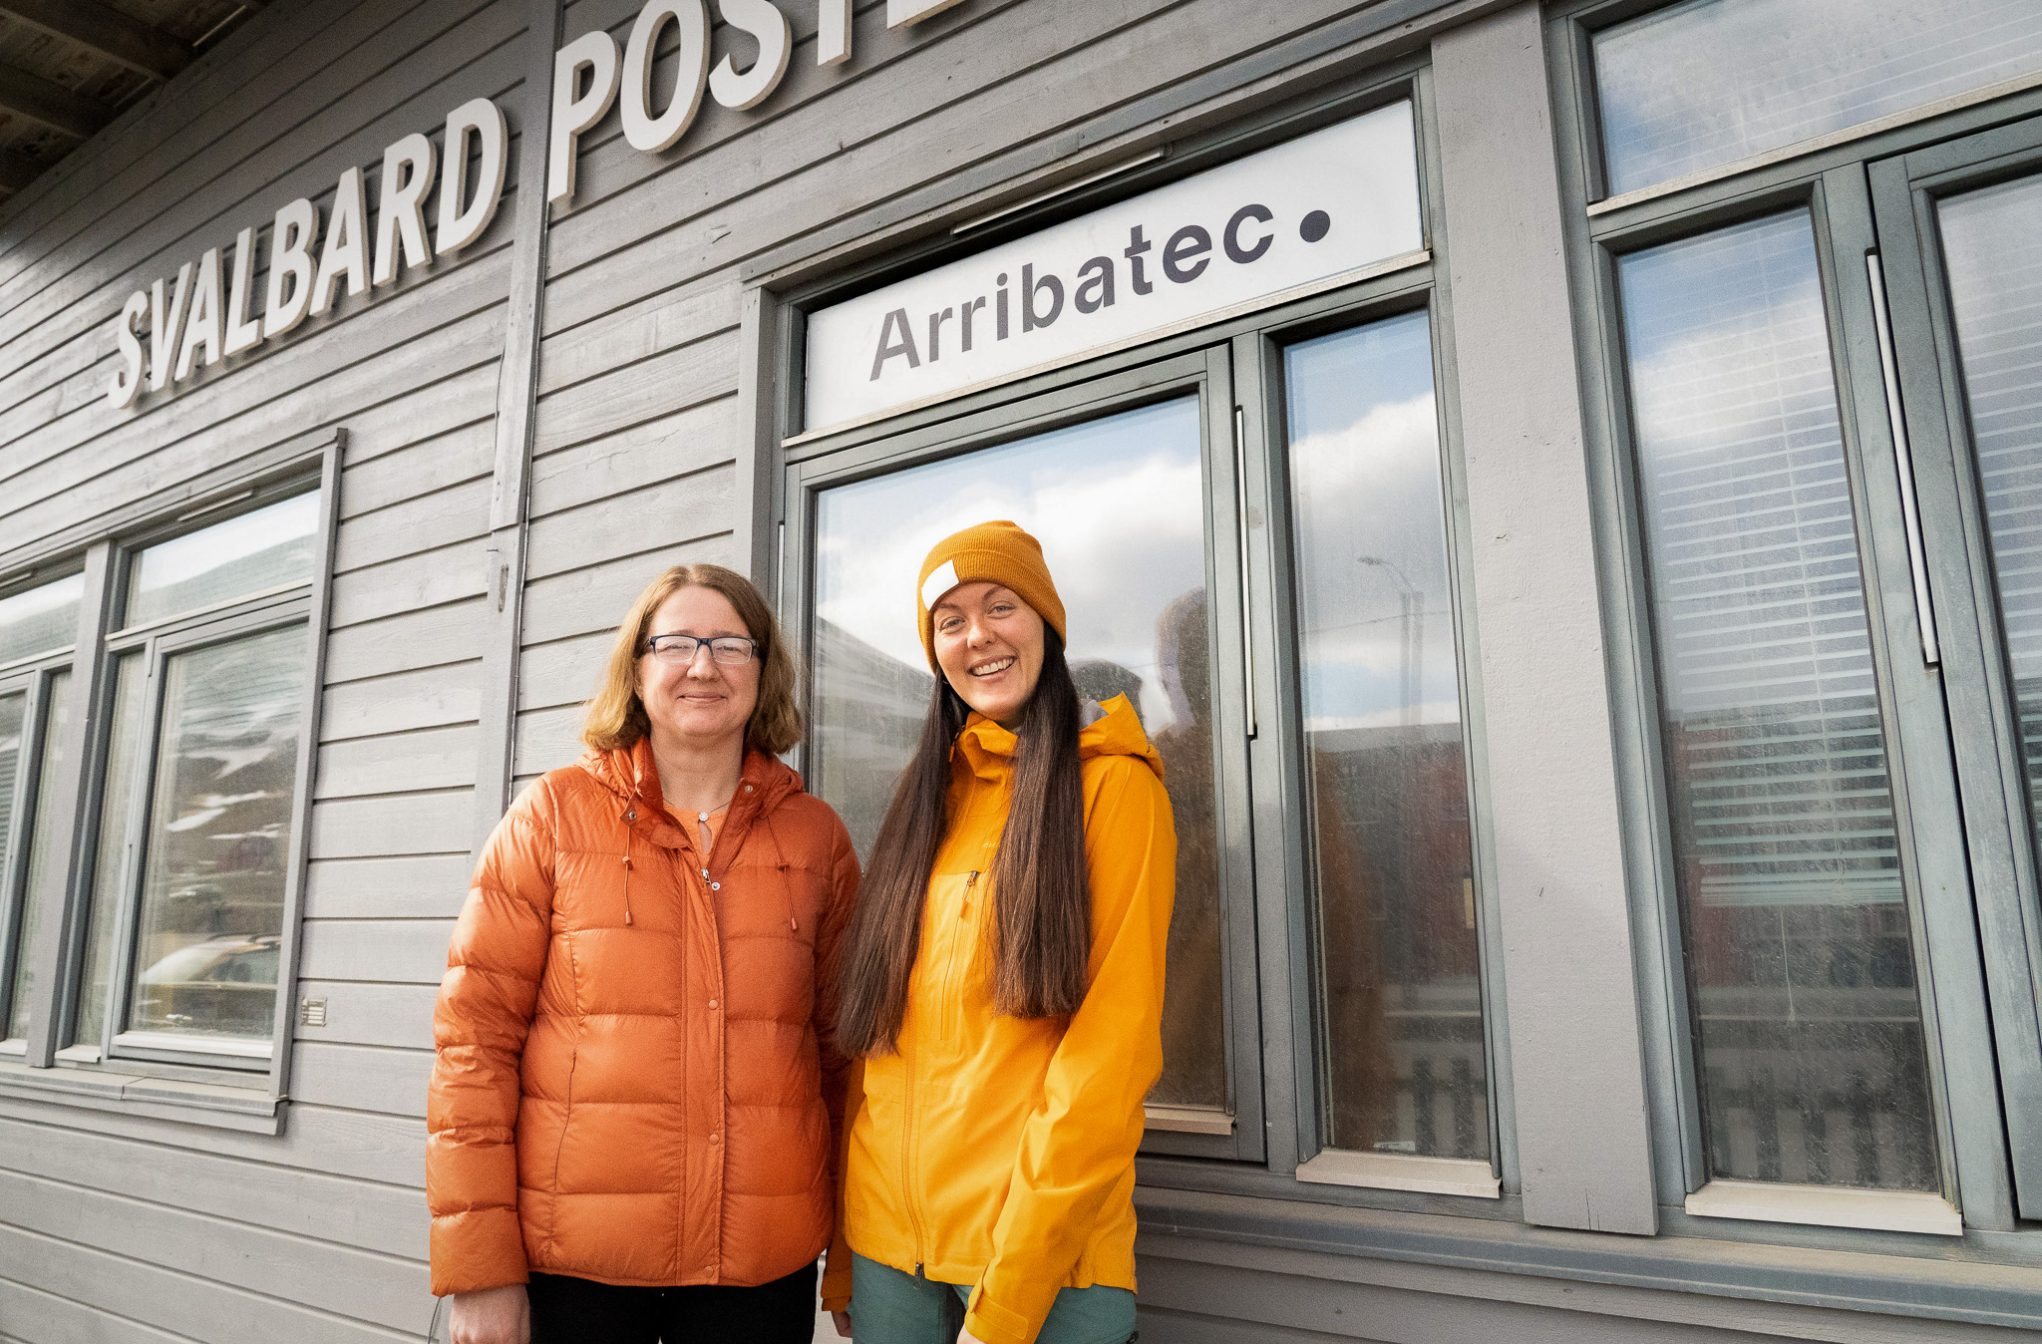 When we state that our global company also have local presence - we really mean it! This year we established an office in the world’s northernmost town, in the city centre of Longyearbyen, Svalbard. Photo: Anja Charlotte Markussen